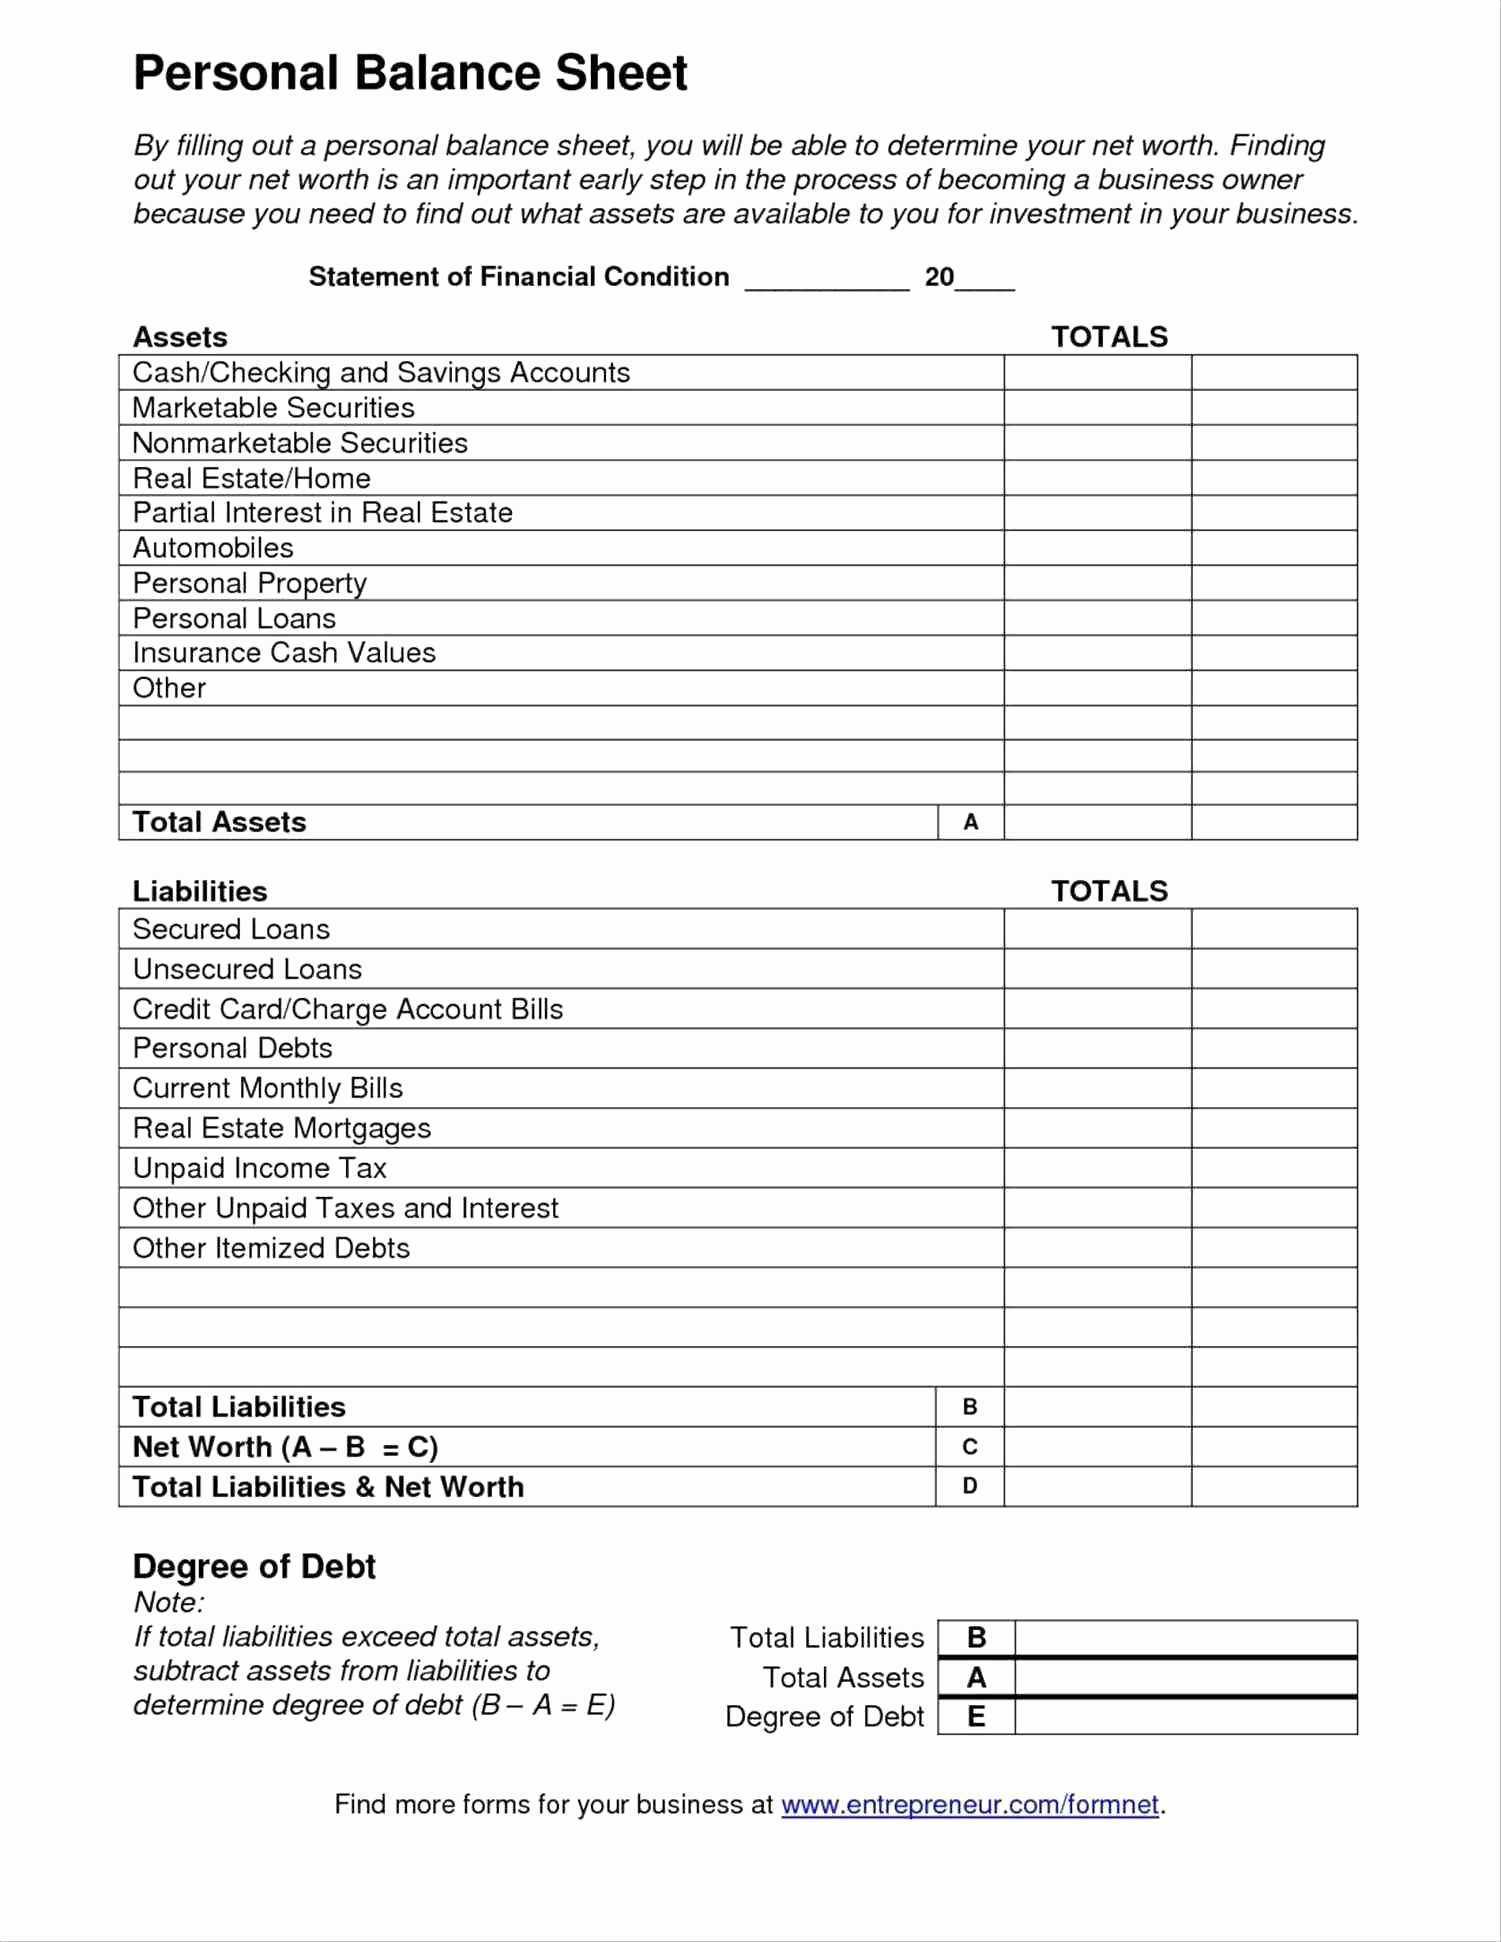 Sales Tax Worksheet or Financial Statement Worksheet Template and Schön Earning Statement